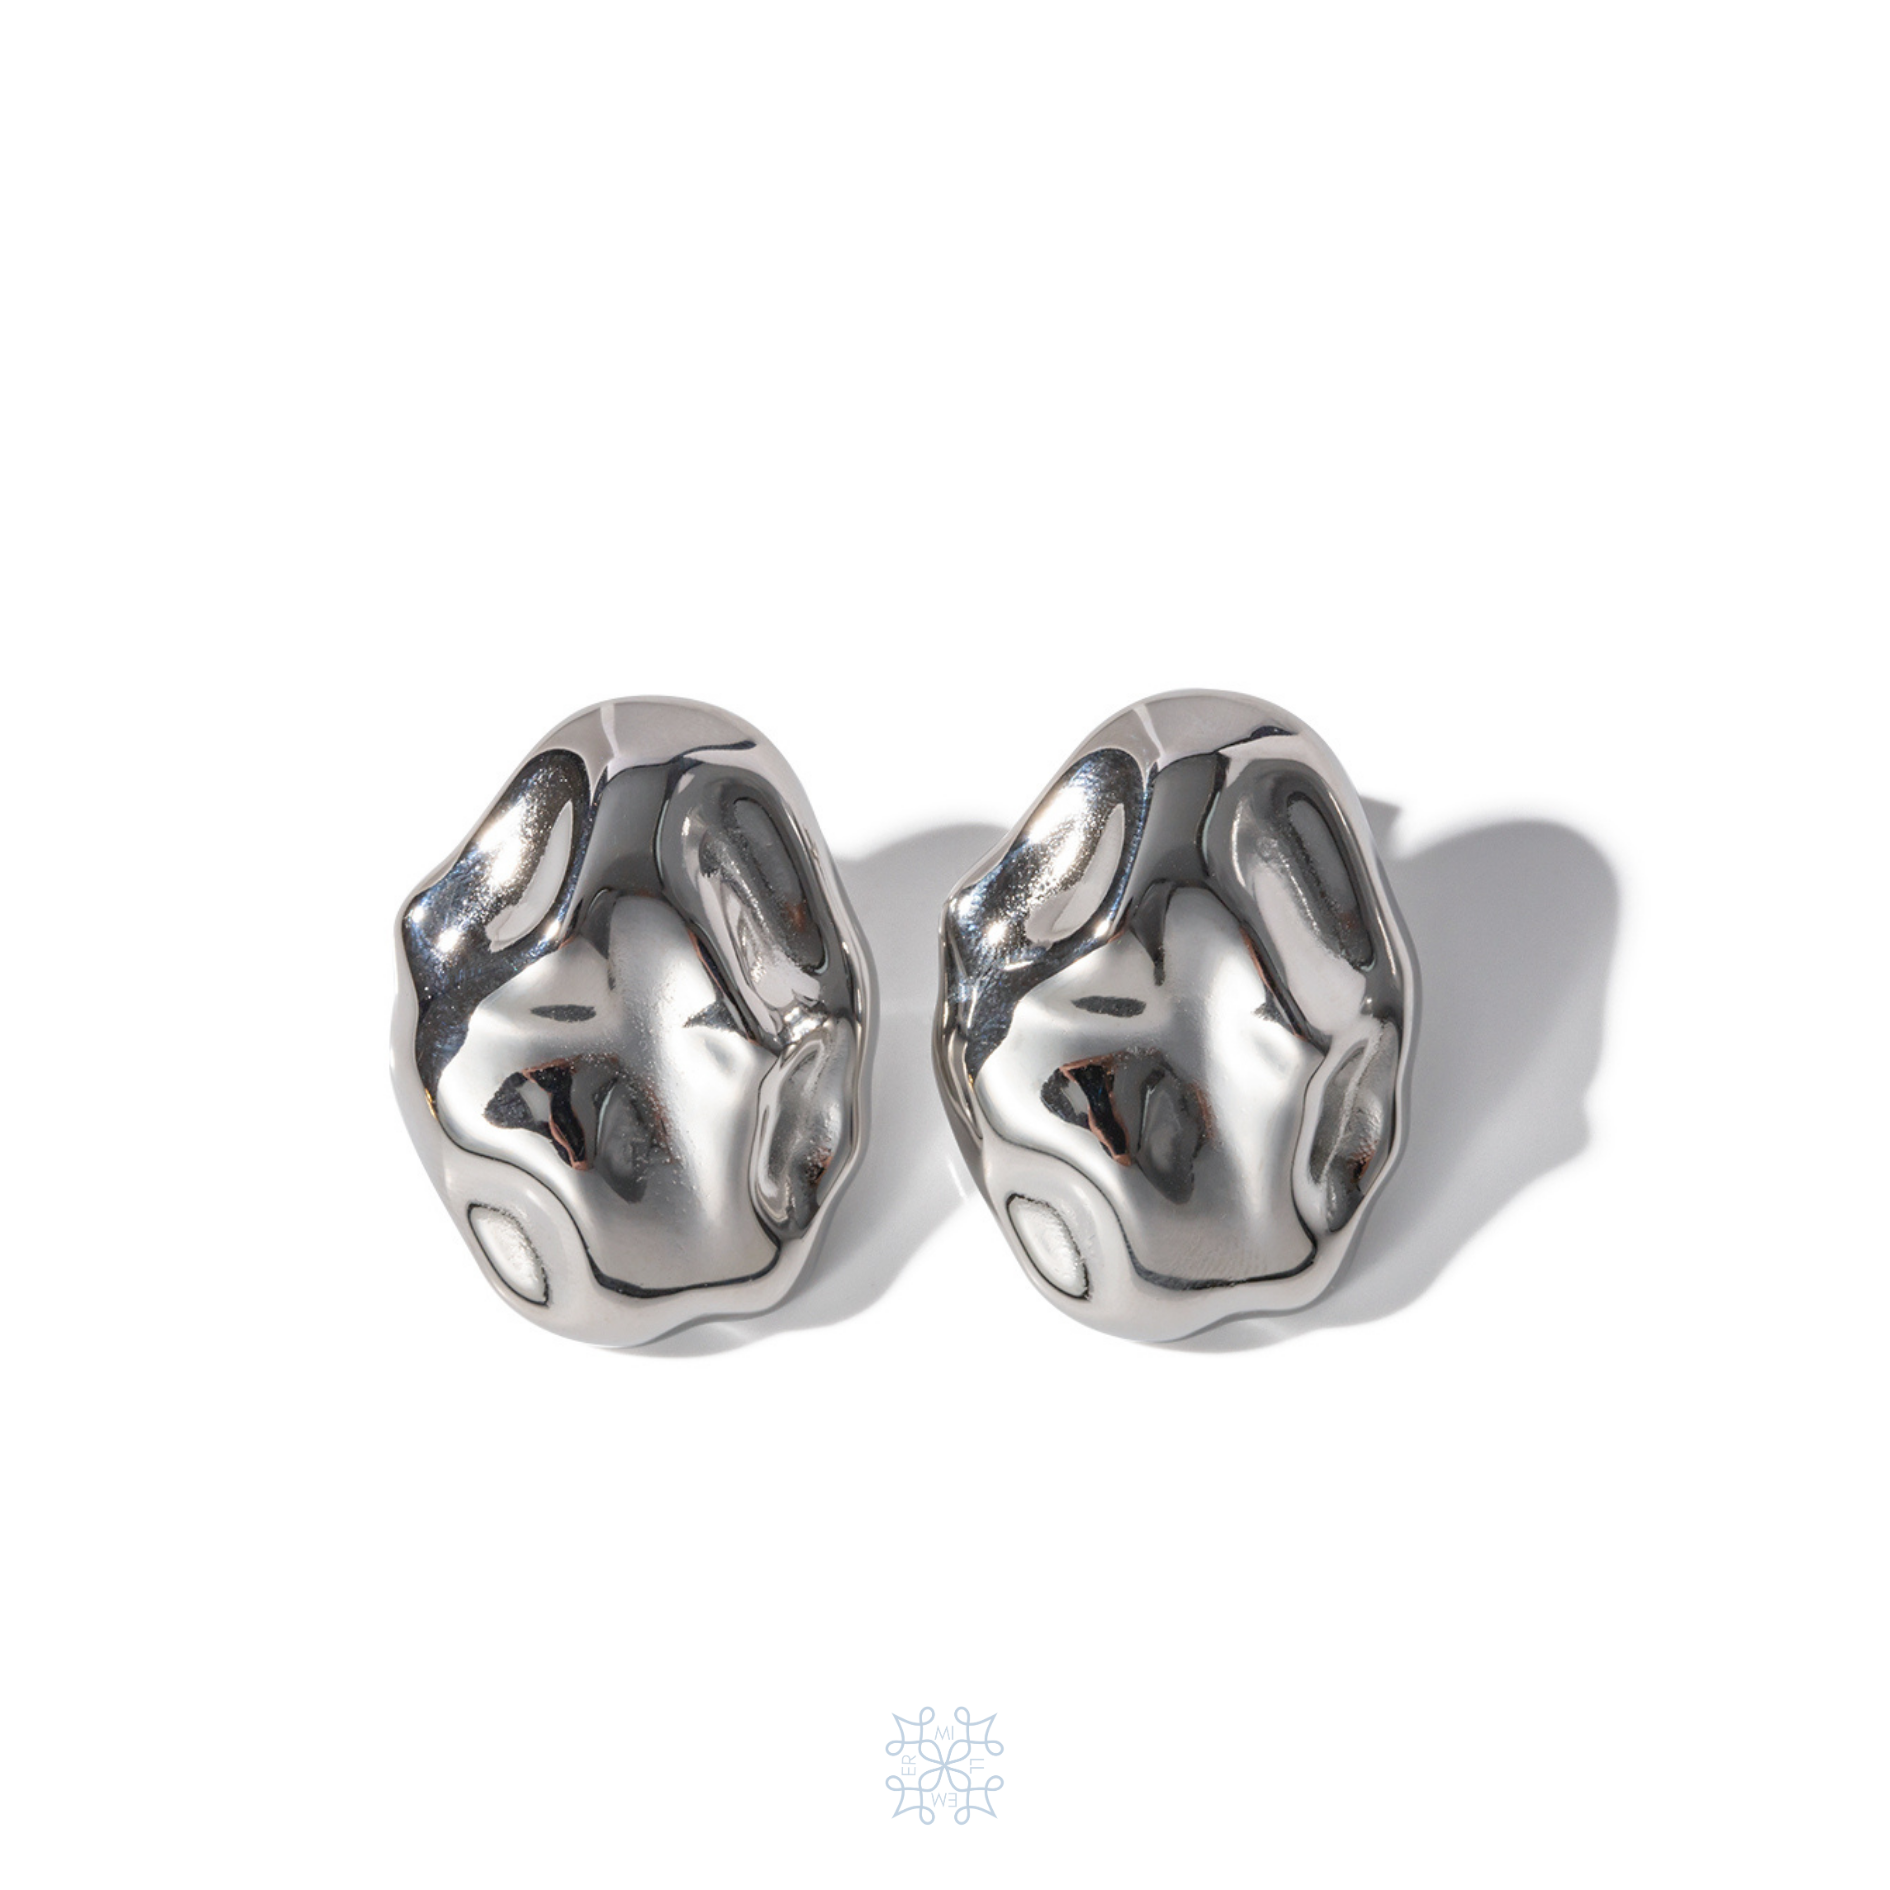 Silver Oval Earring with an irregualr surface resembling an hammered metal with the shape of an oval rock. Silver Plated. Pebble Silver Earrings